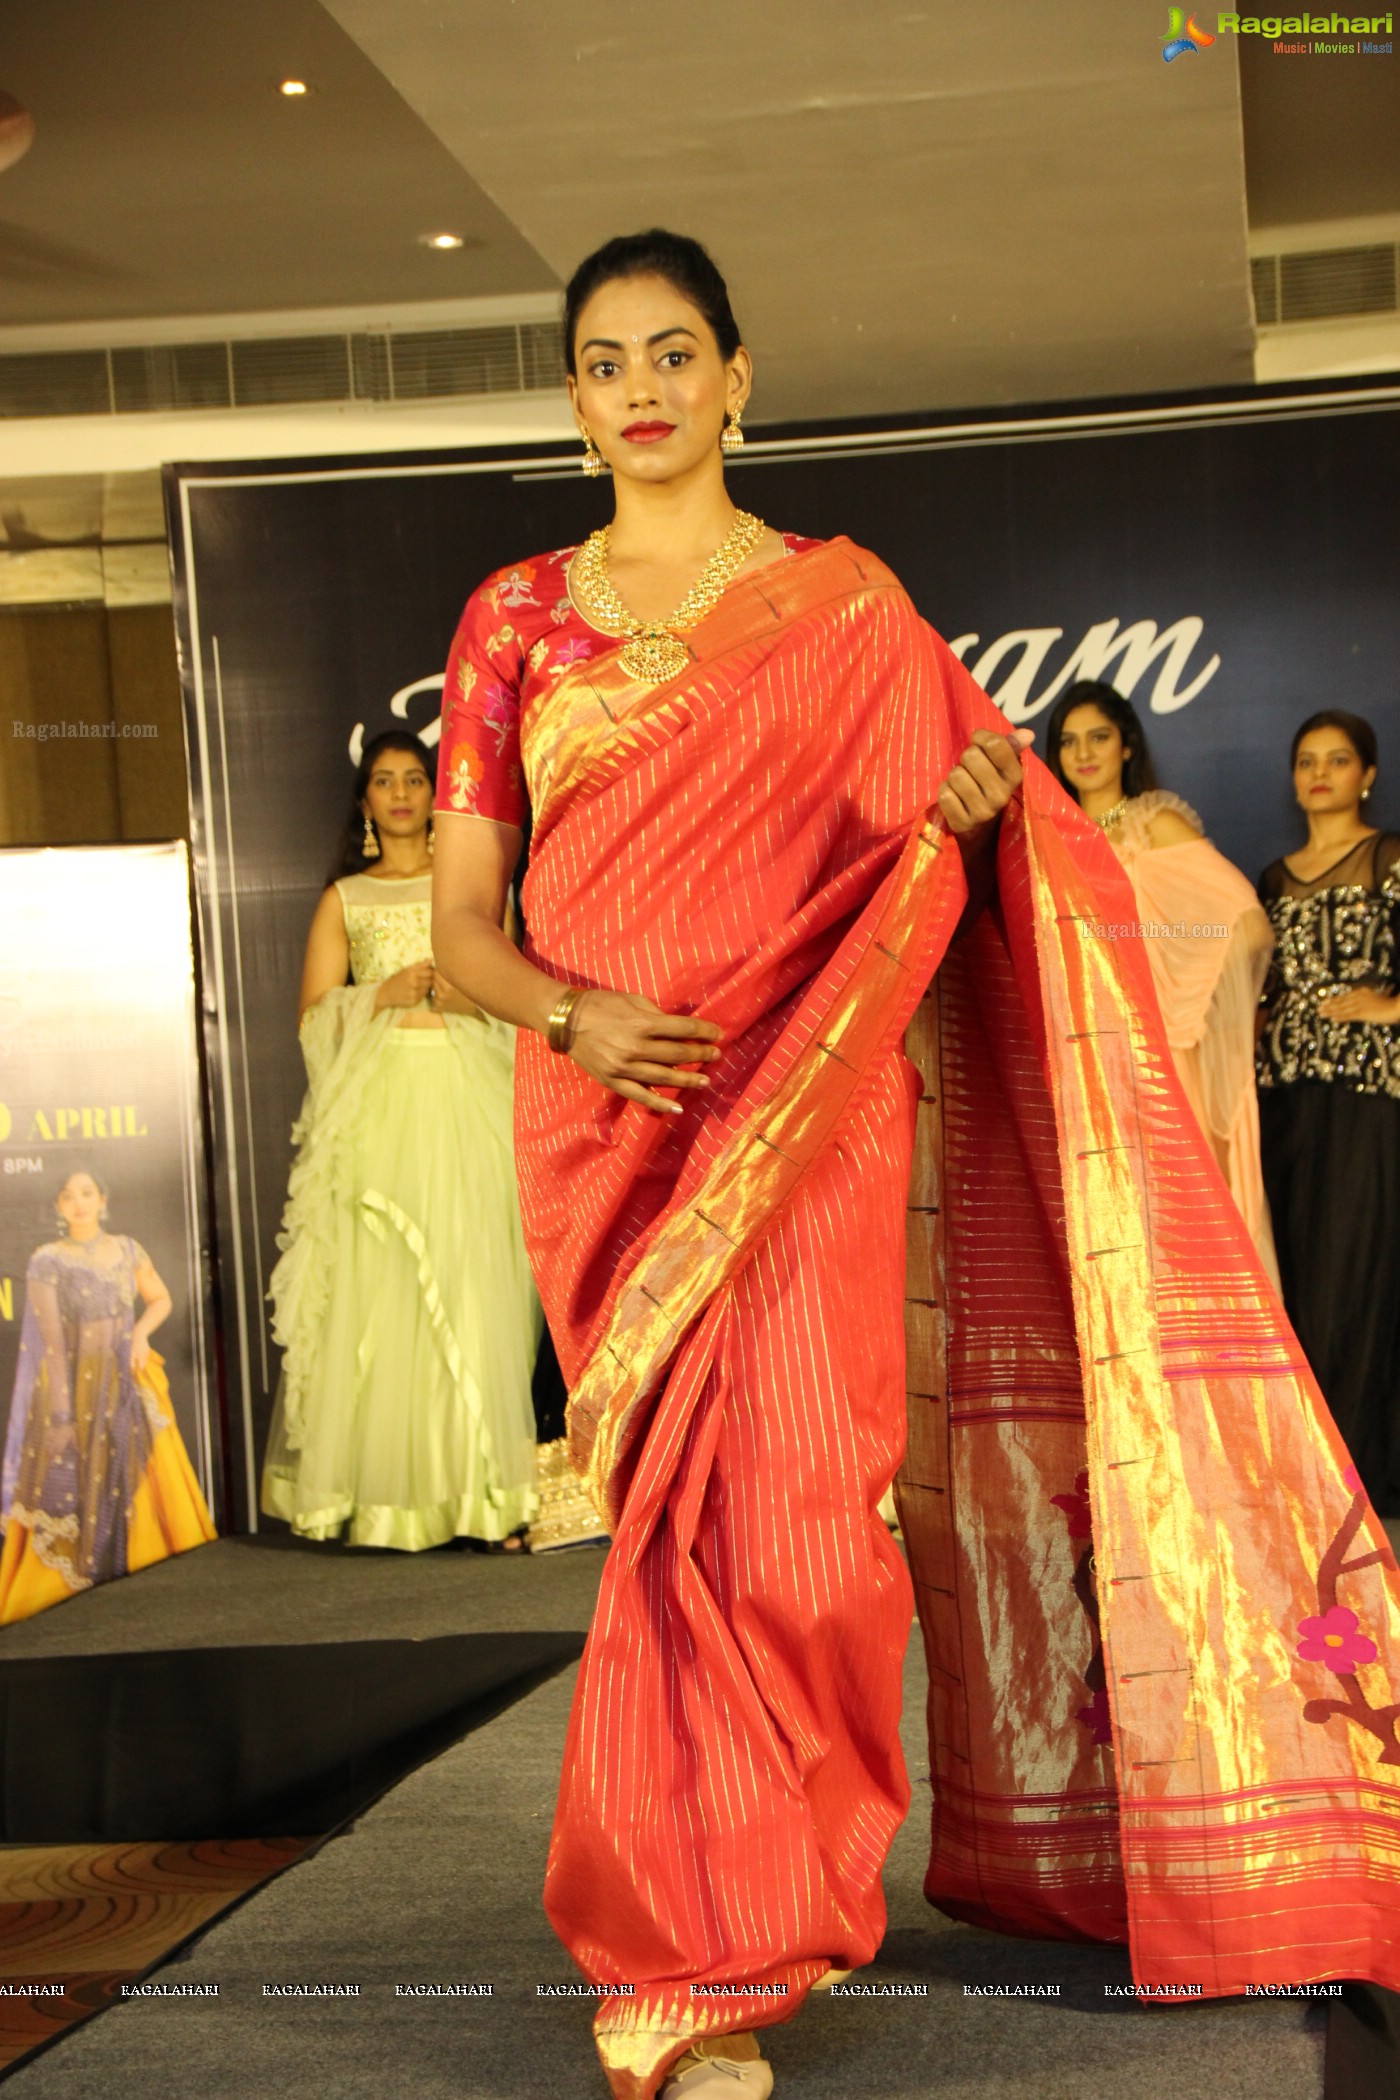 Arkayam Fashion and Lifestyle Exhibition Poster Launch at Taj Decan